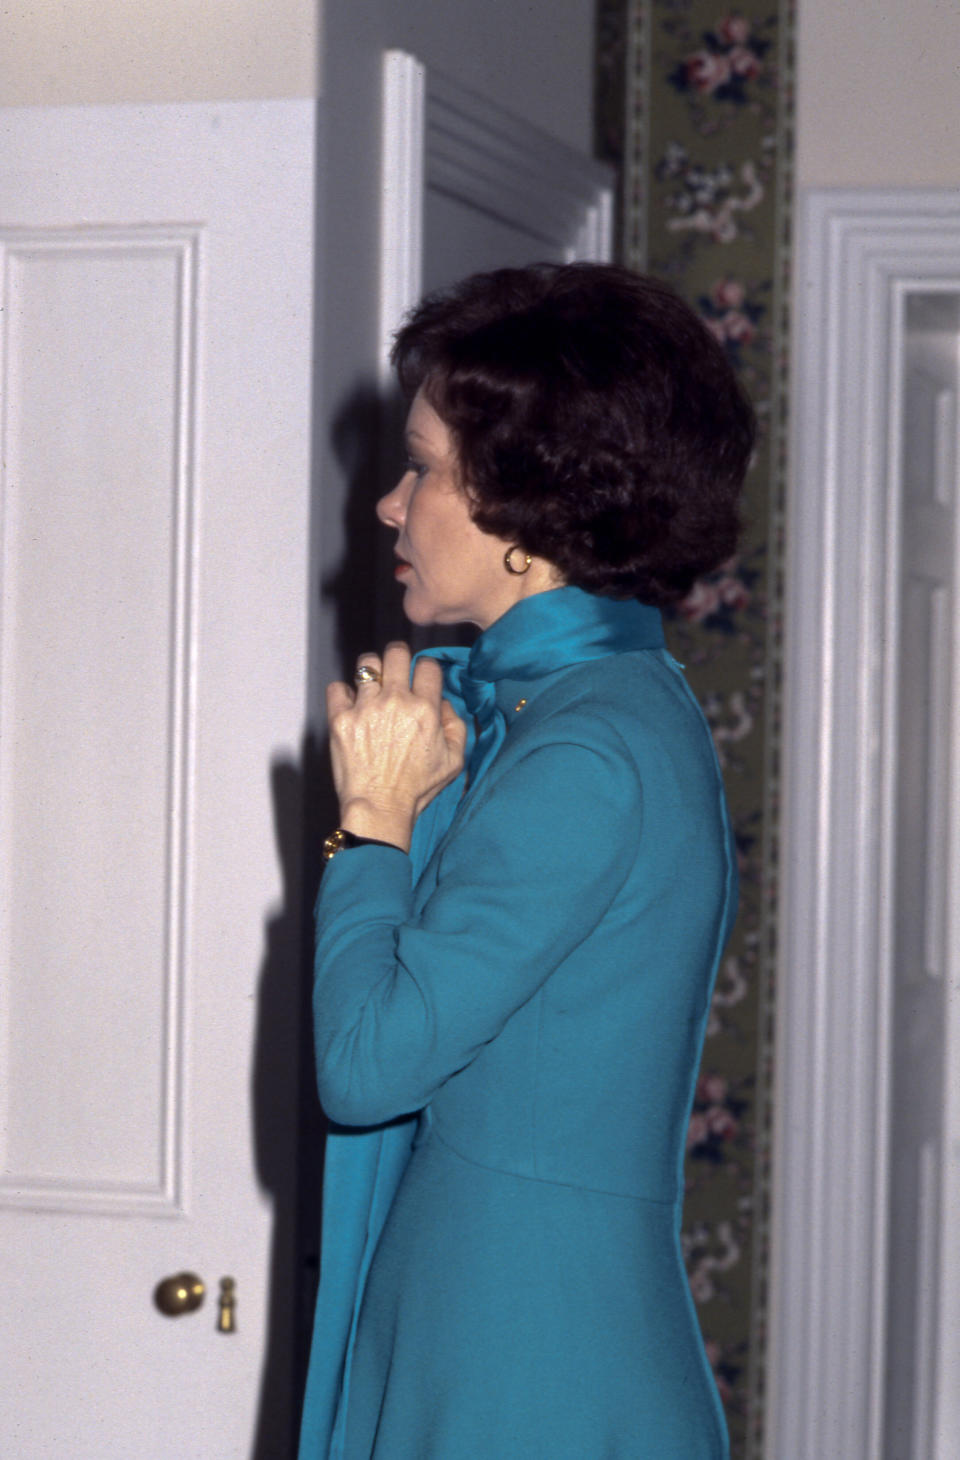 Rosalynn Carter prepares for husband Jimmy Carter's inaugural parade in 1977.